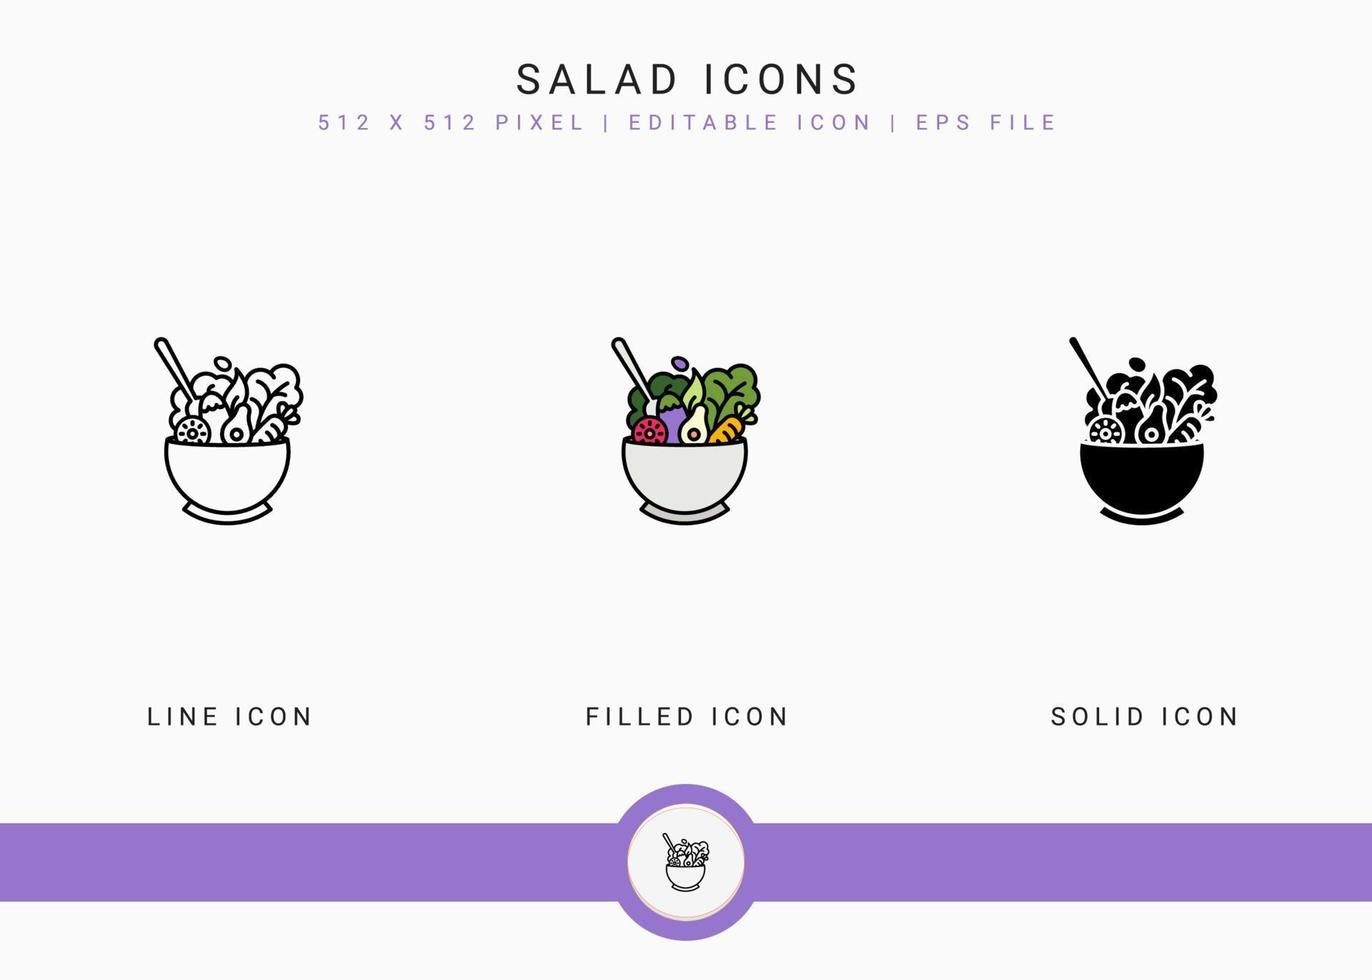 Salad icons set vector illustration with solid icon line style. Healthy vegan ingredients concept. Editable stroke icon on isolated white background for web design, user interface, and mobile app